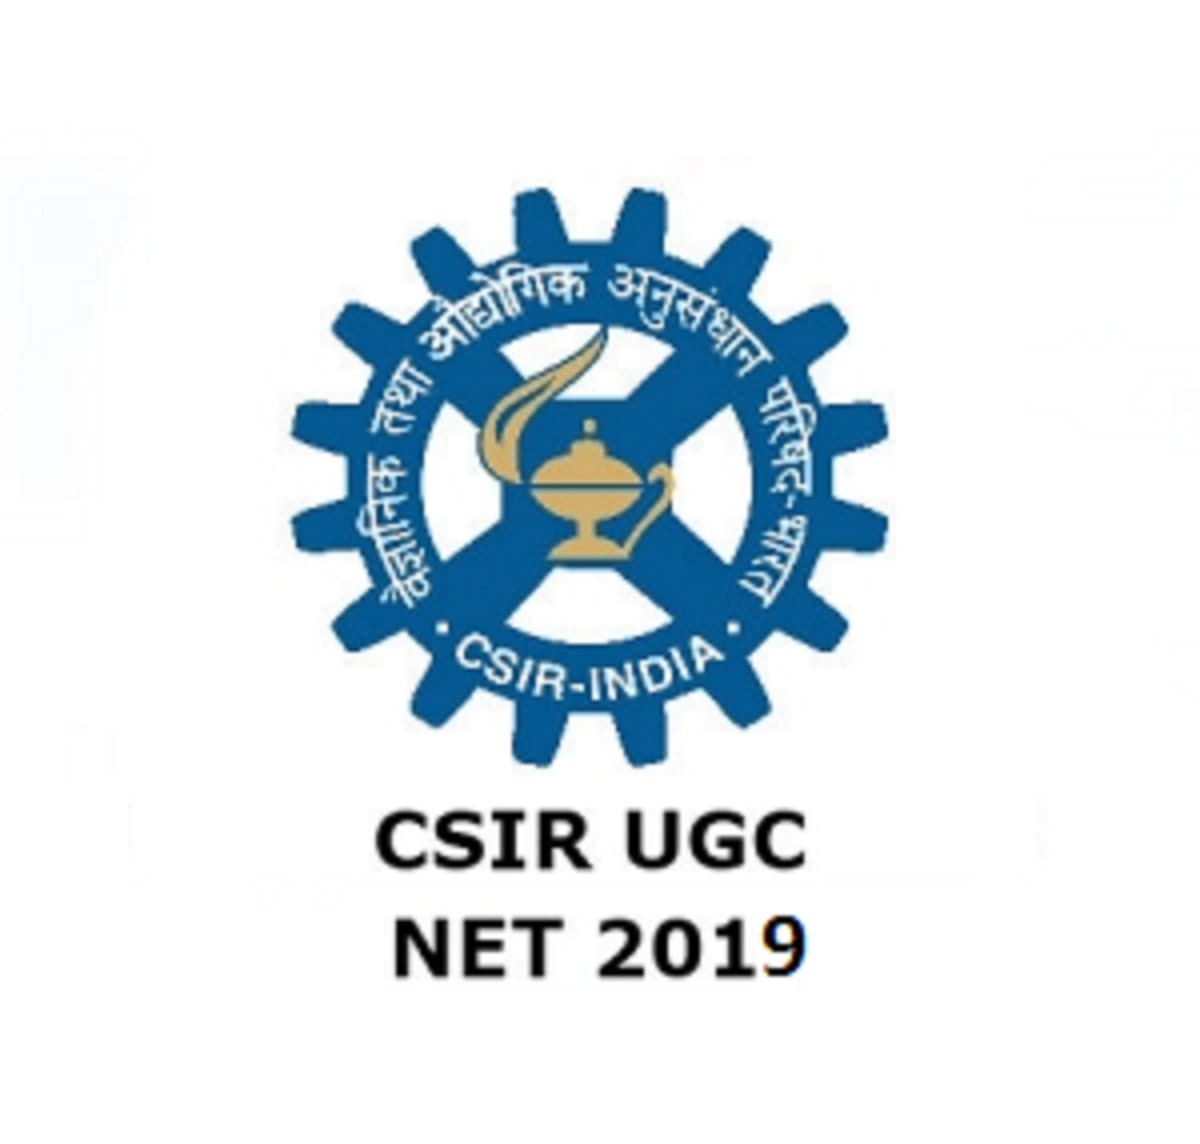 CSIR NET 2019 Admit Card Released, Check Direct Link Here